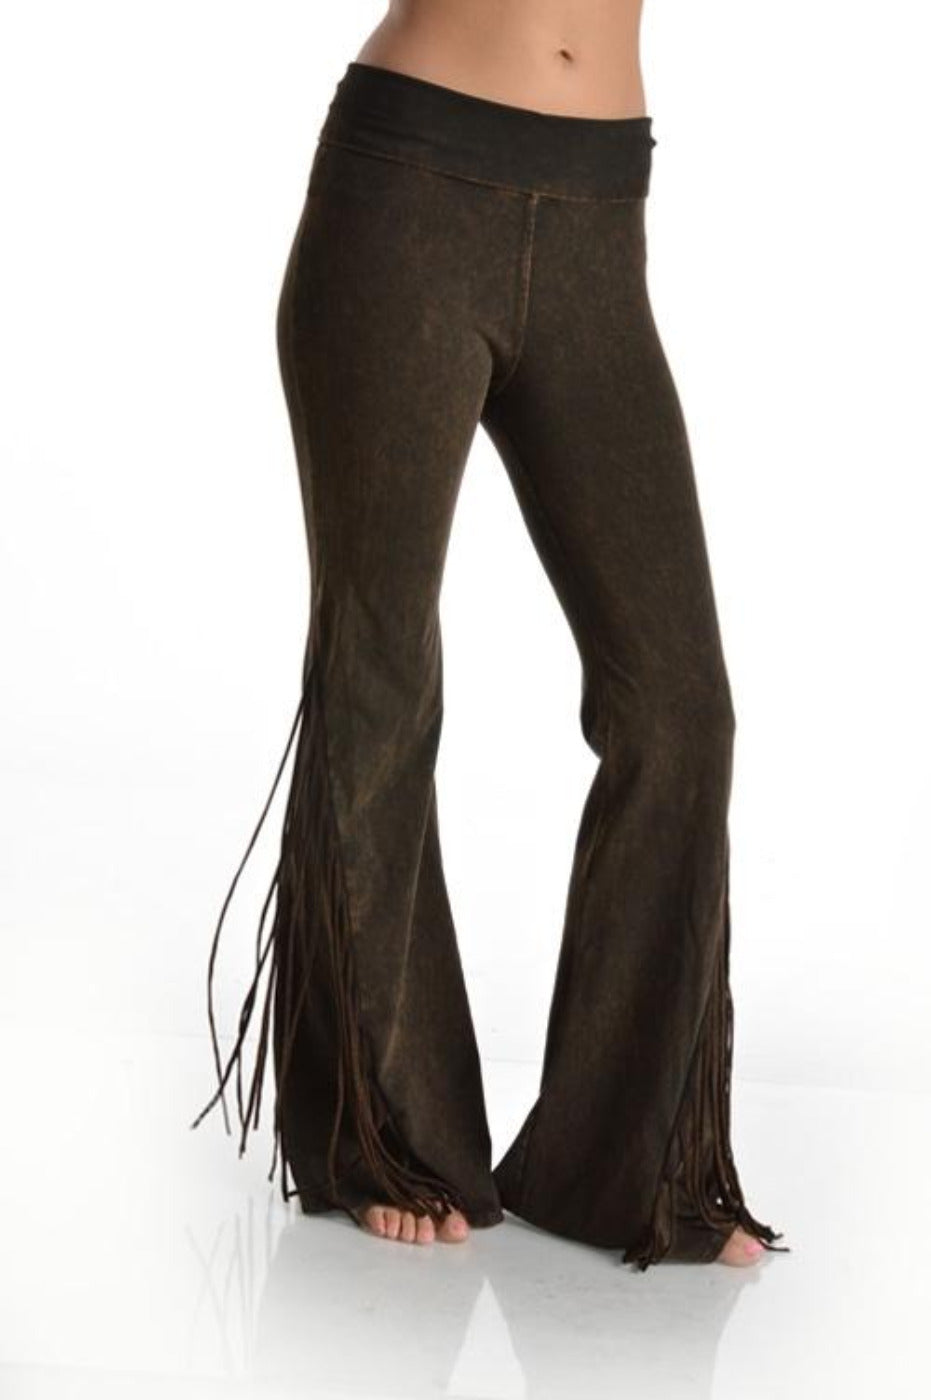 Flared Mineral Washed Fringed Foldover Yoga Pants - Brown - Made In USA